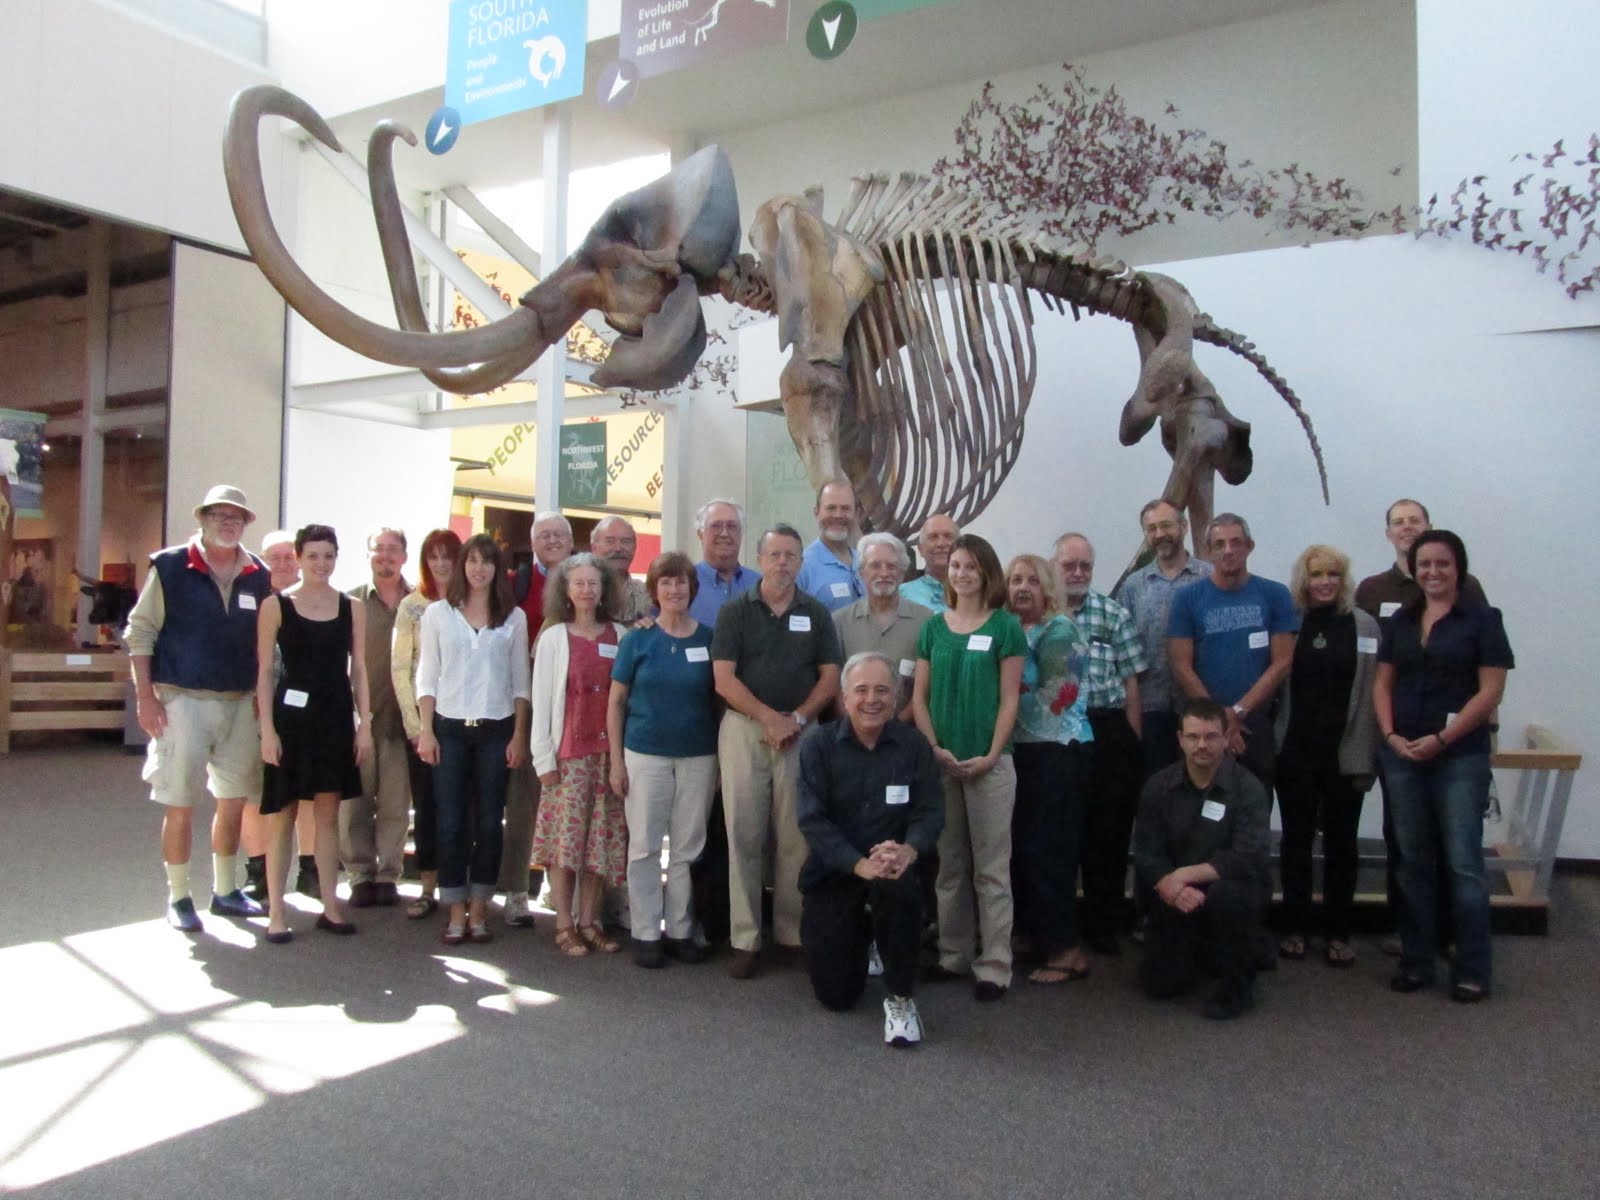 meeting attendees posing for a photo in front of the mastadon skeleton at Powell Hall